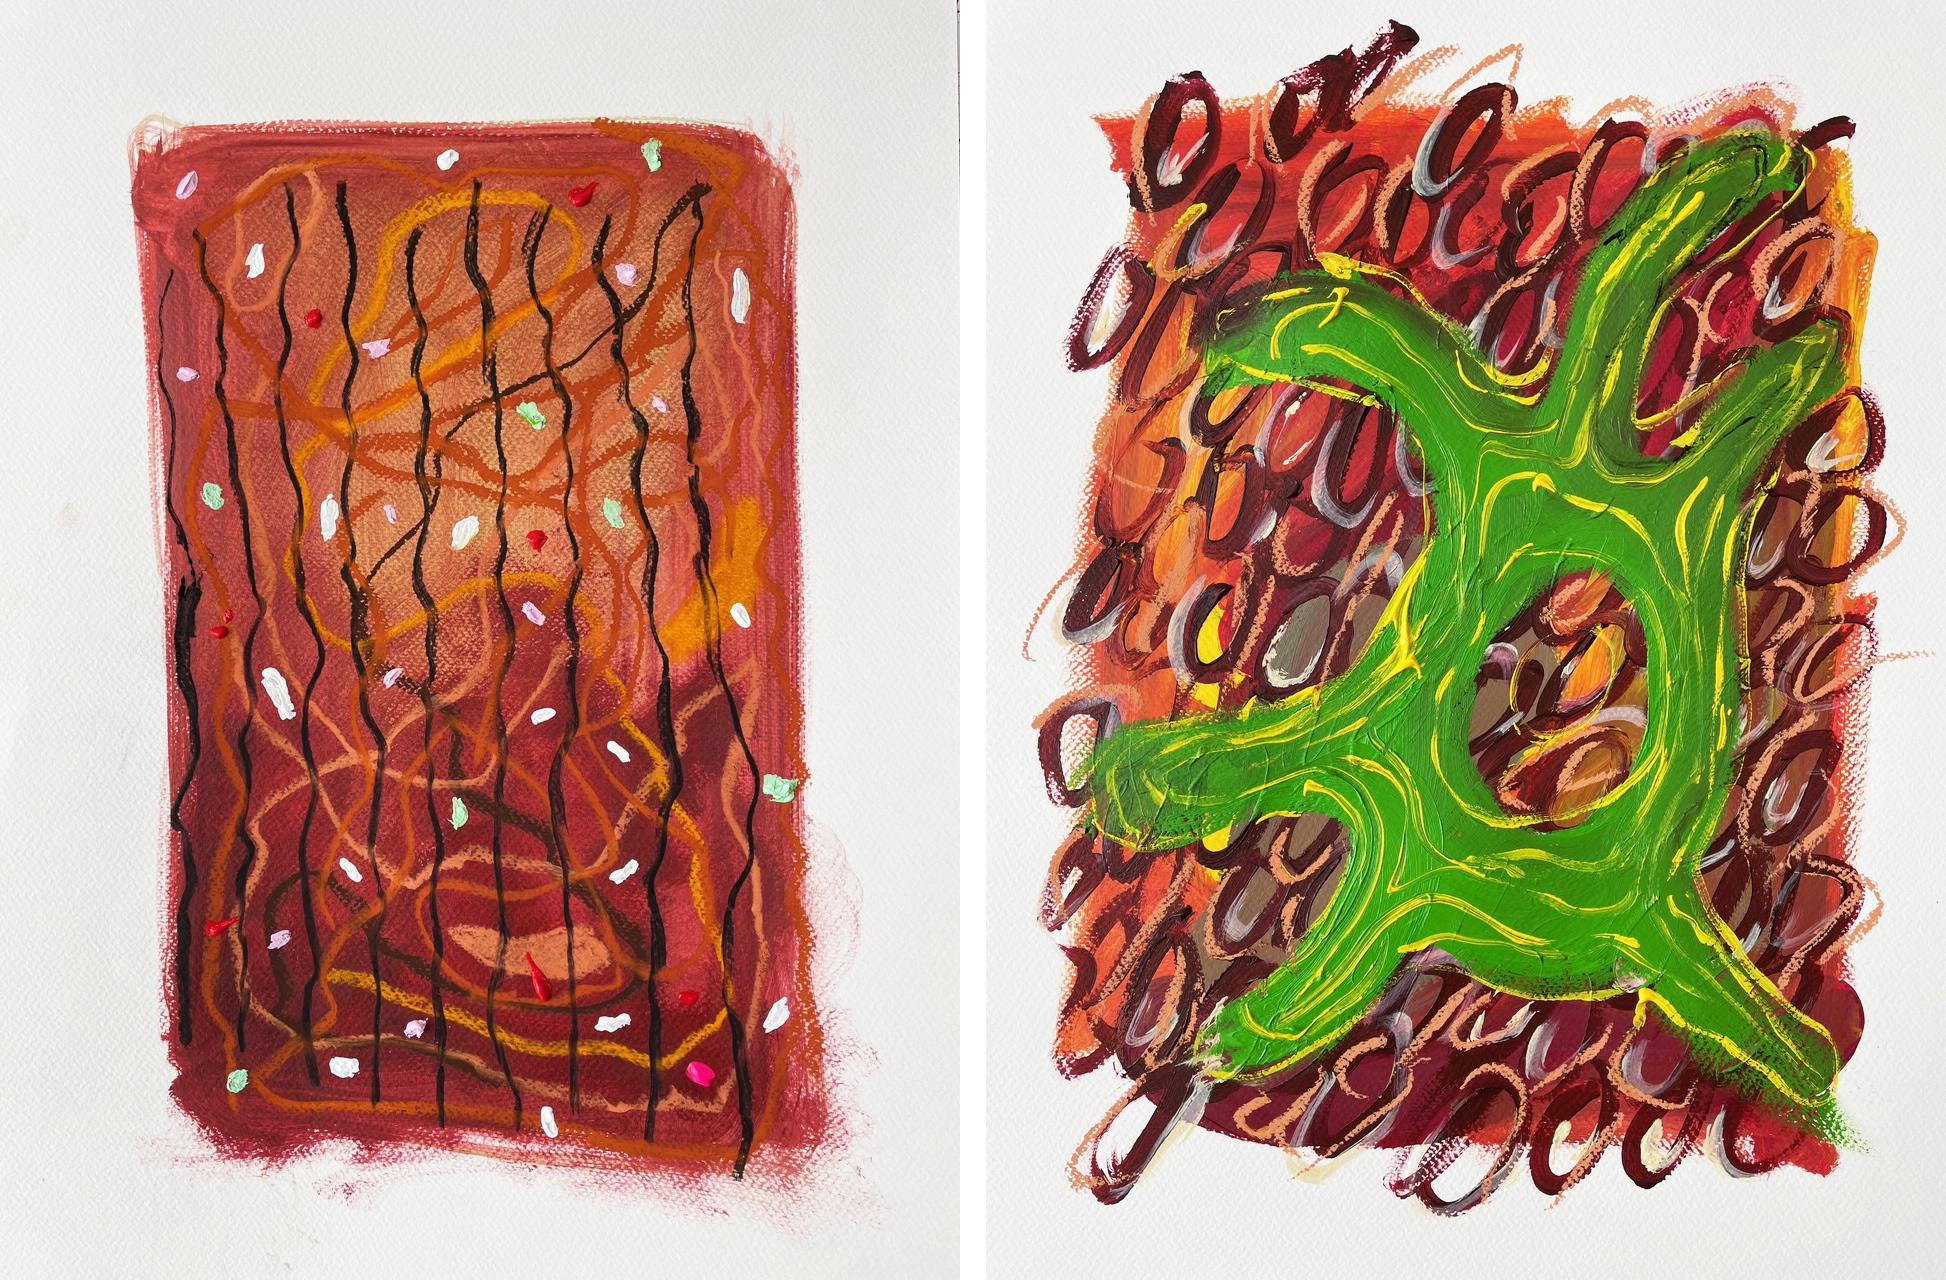 Alec Franco  Abstract Painting - Lab #4 and #3 Paintings. From the Lab series